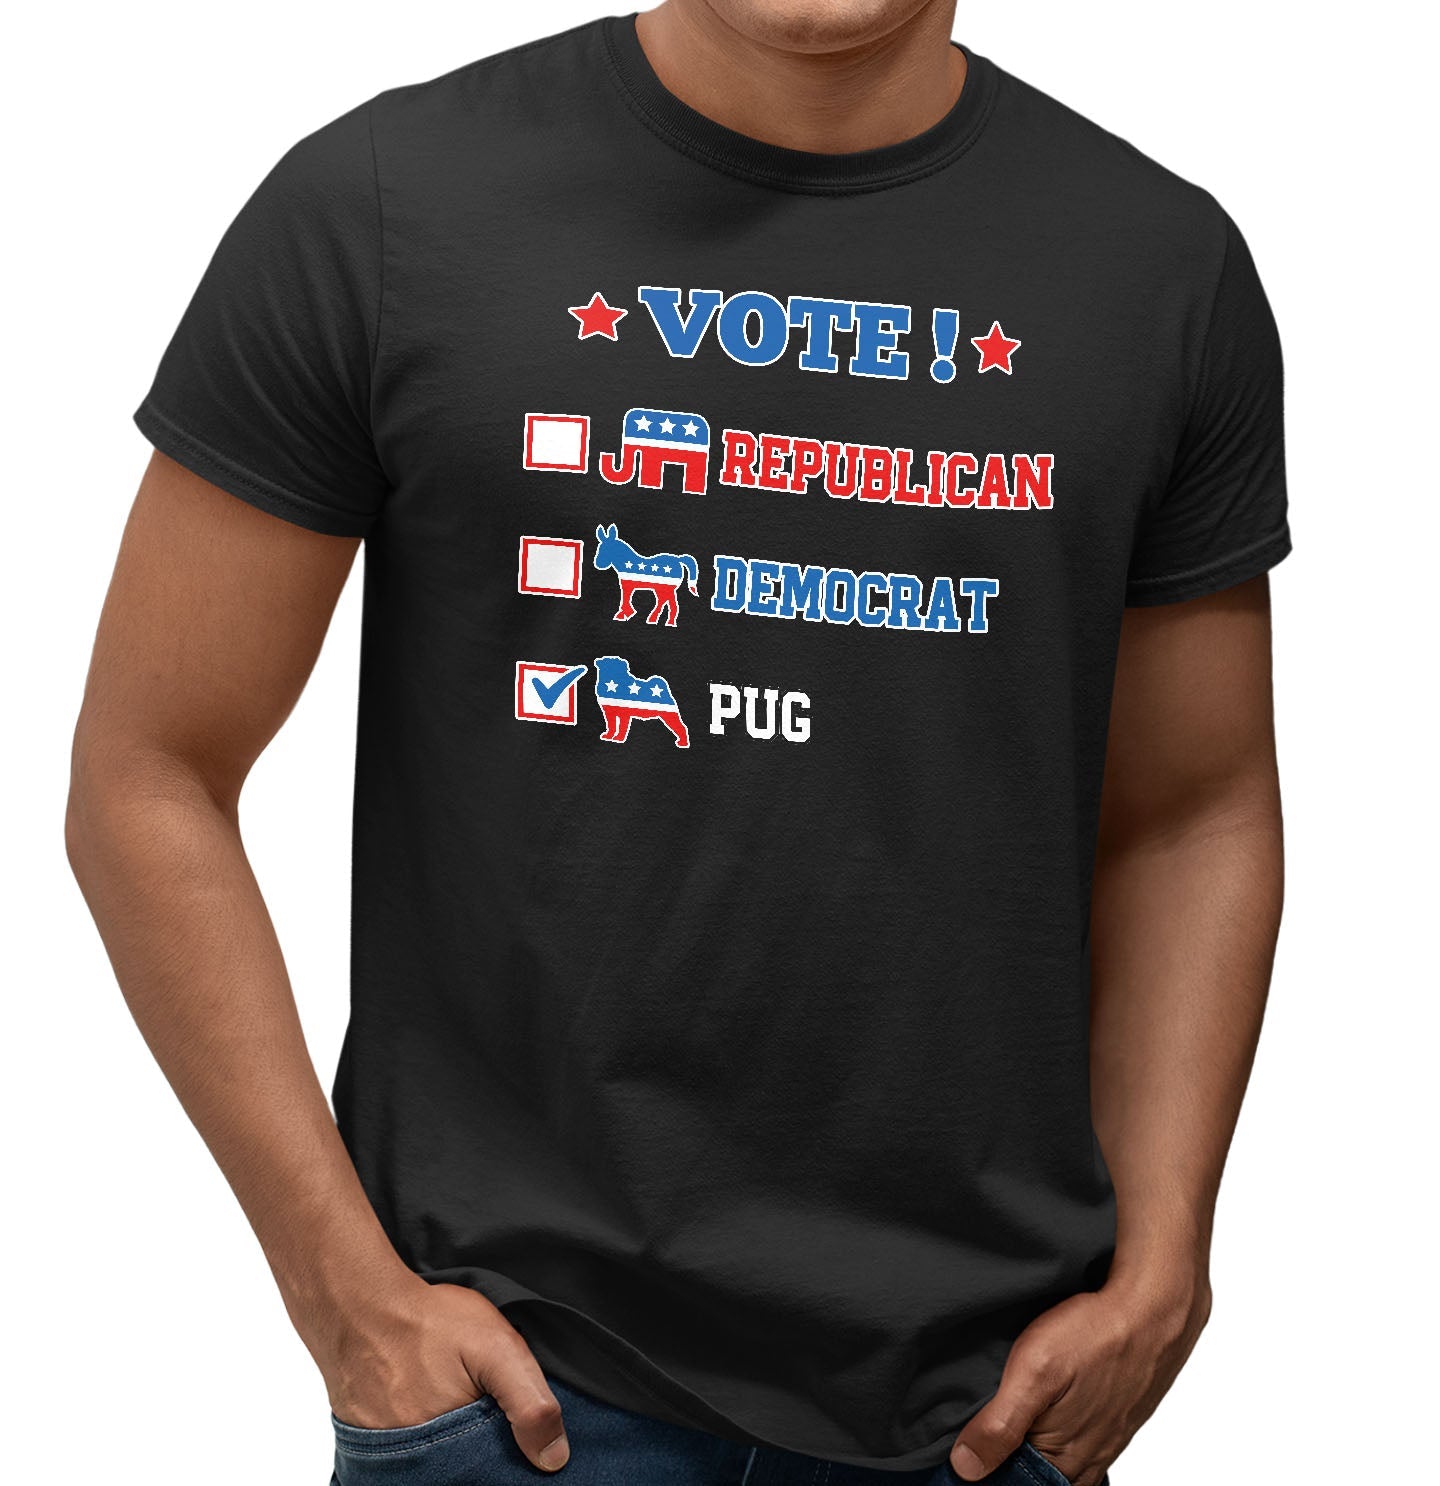 Vote for the Pug - Adult Unisex T-Shirt